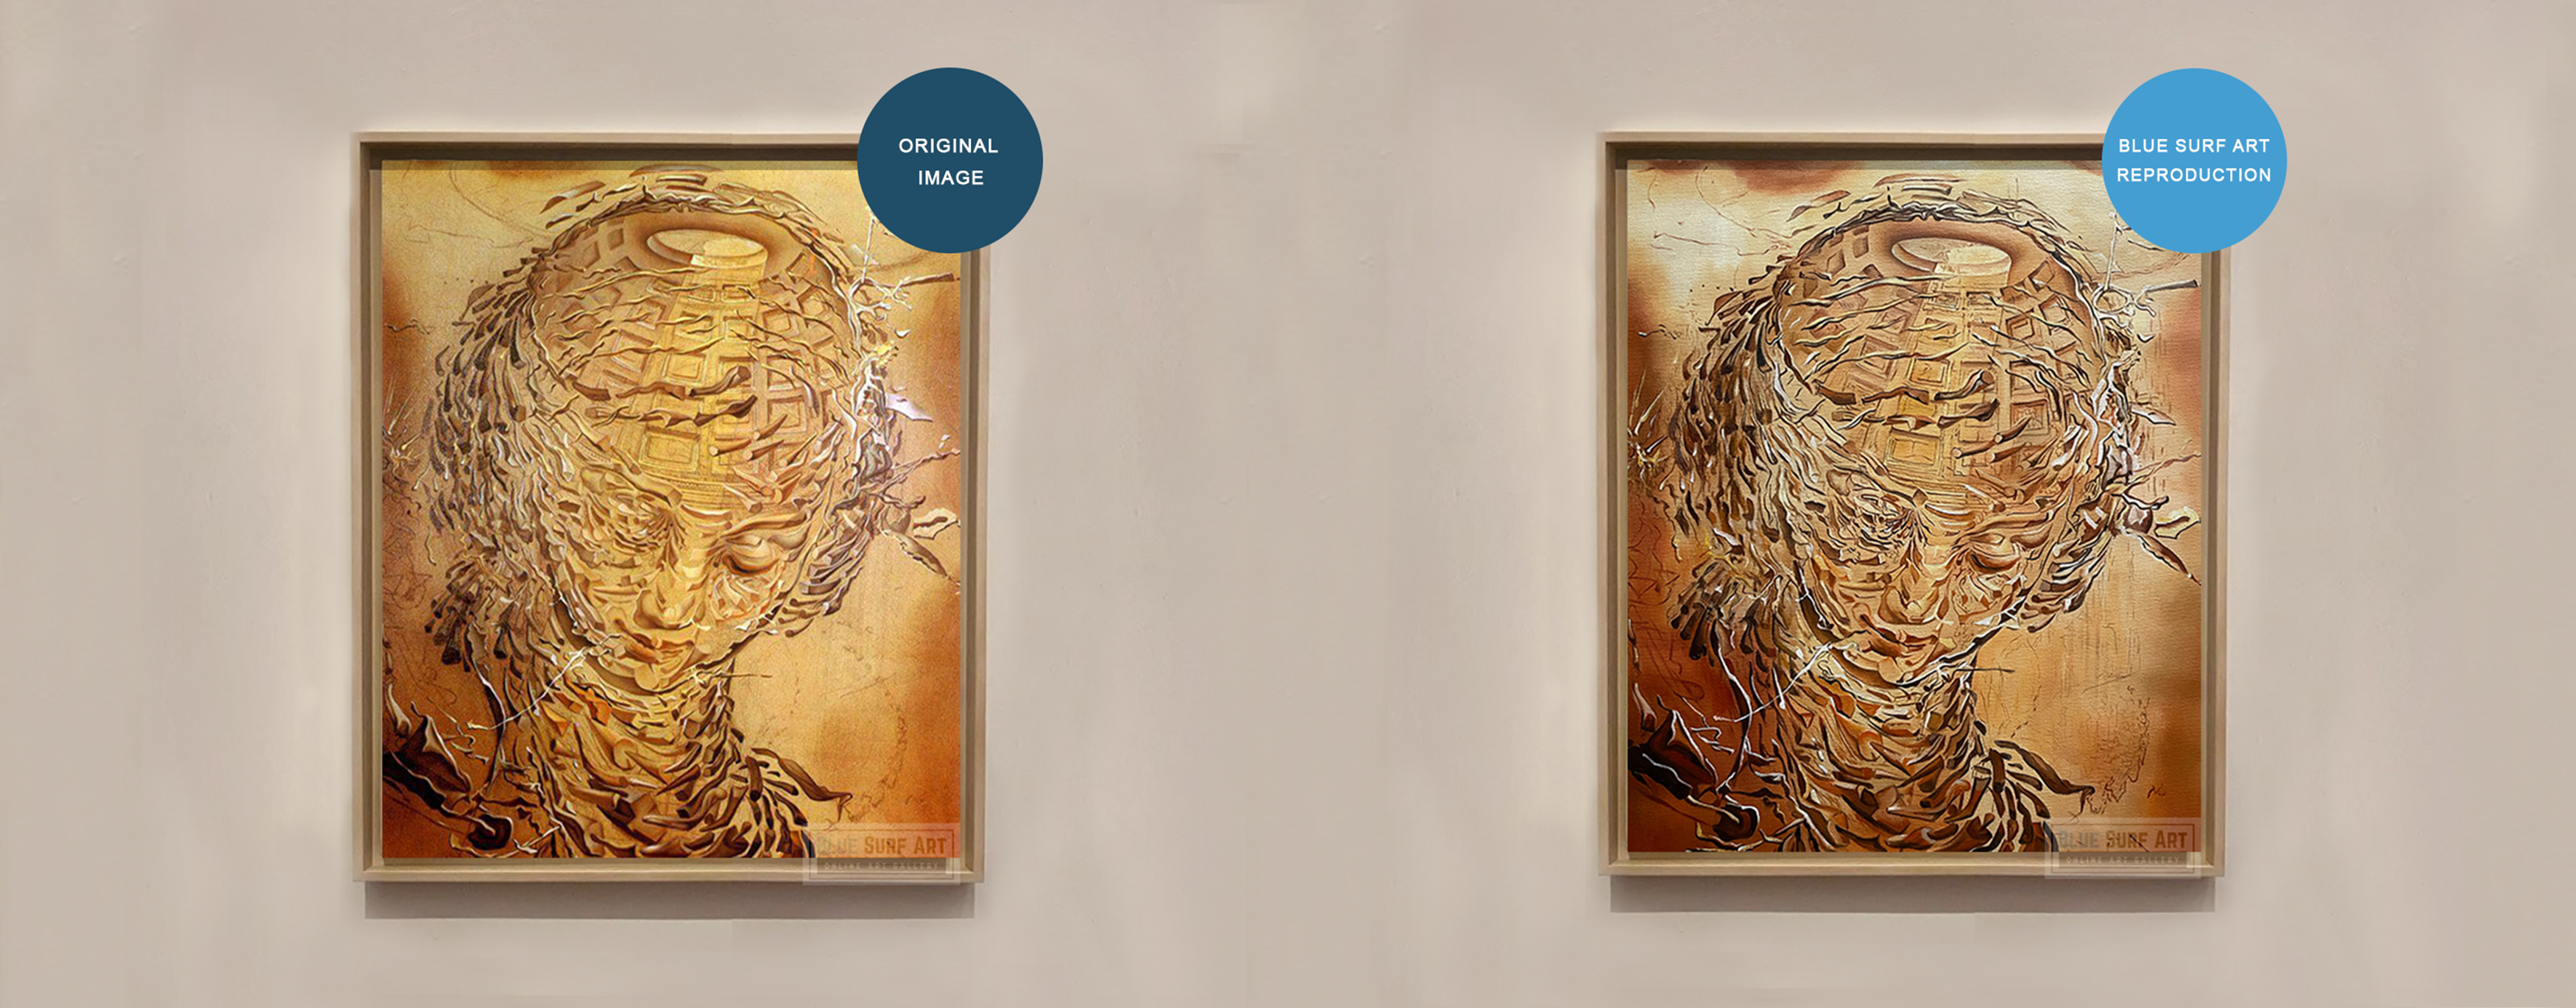 Compare between Raphaelesque Head Exploding Salvador Dali and reproduction by Blue Surf Art